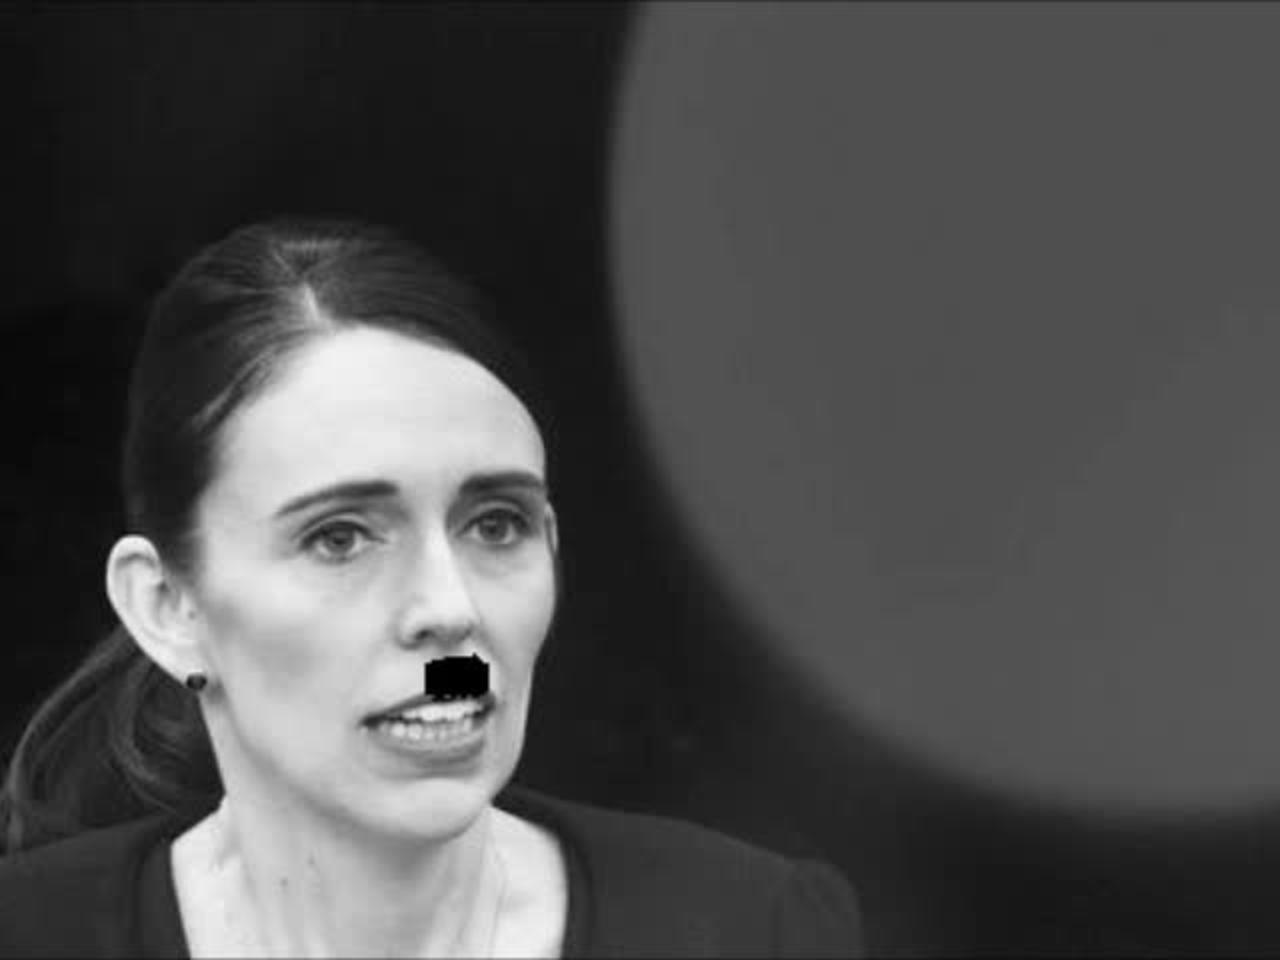 The Triumph of Jacinda's Will or Downfall?